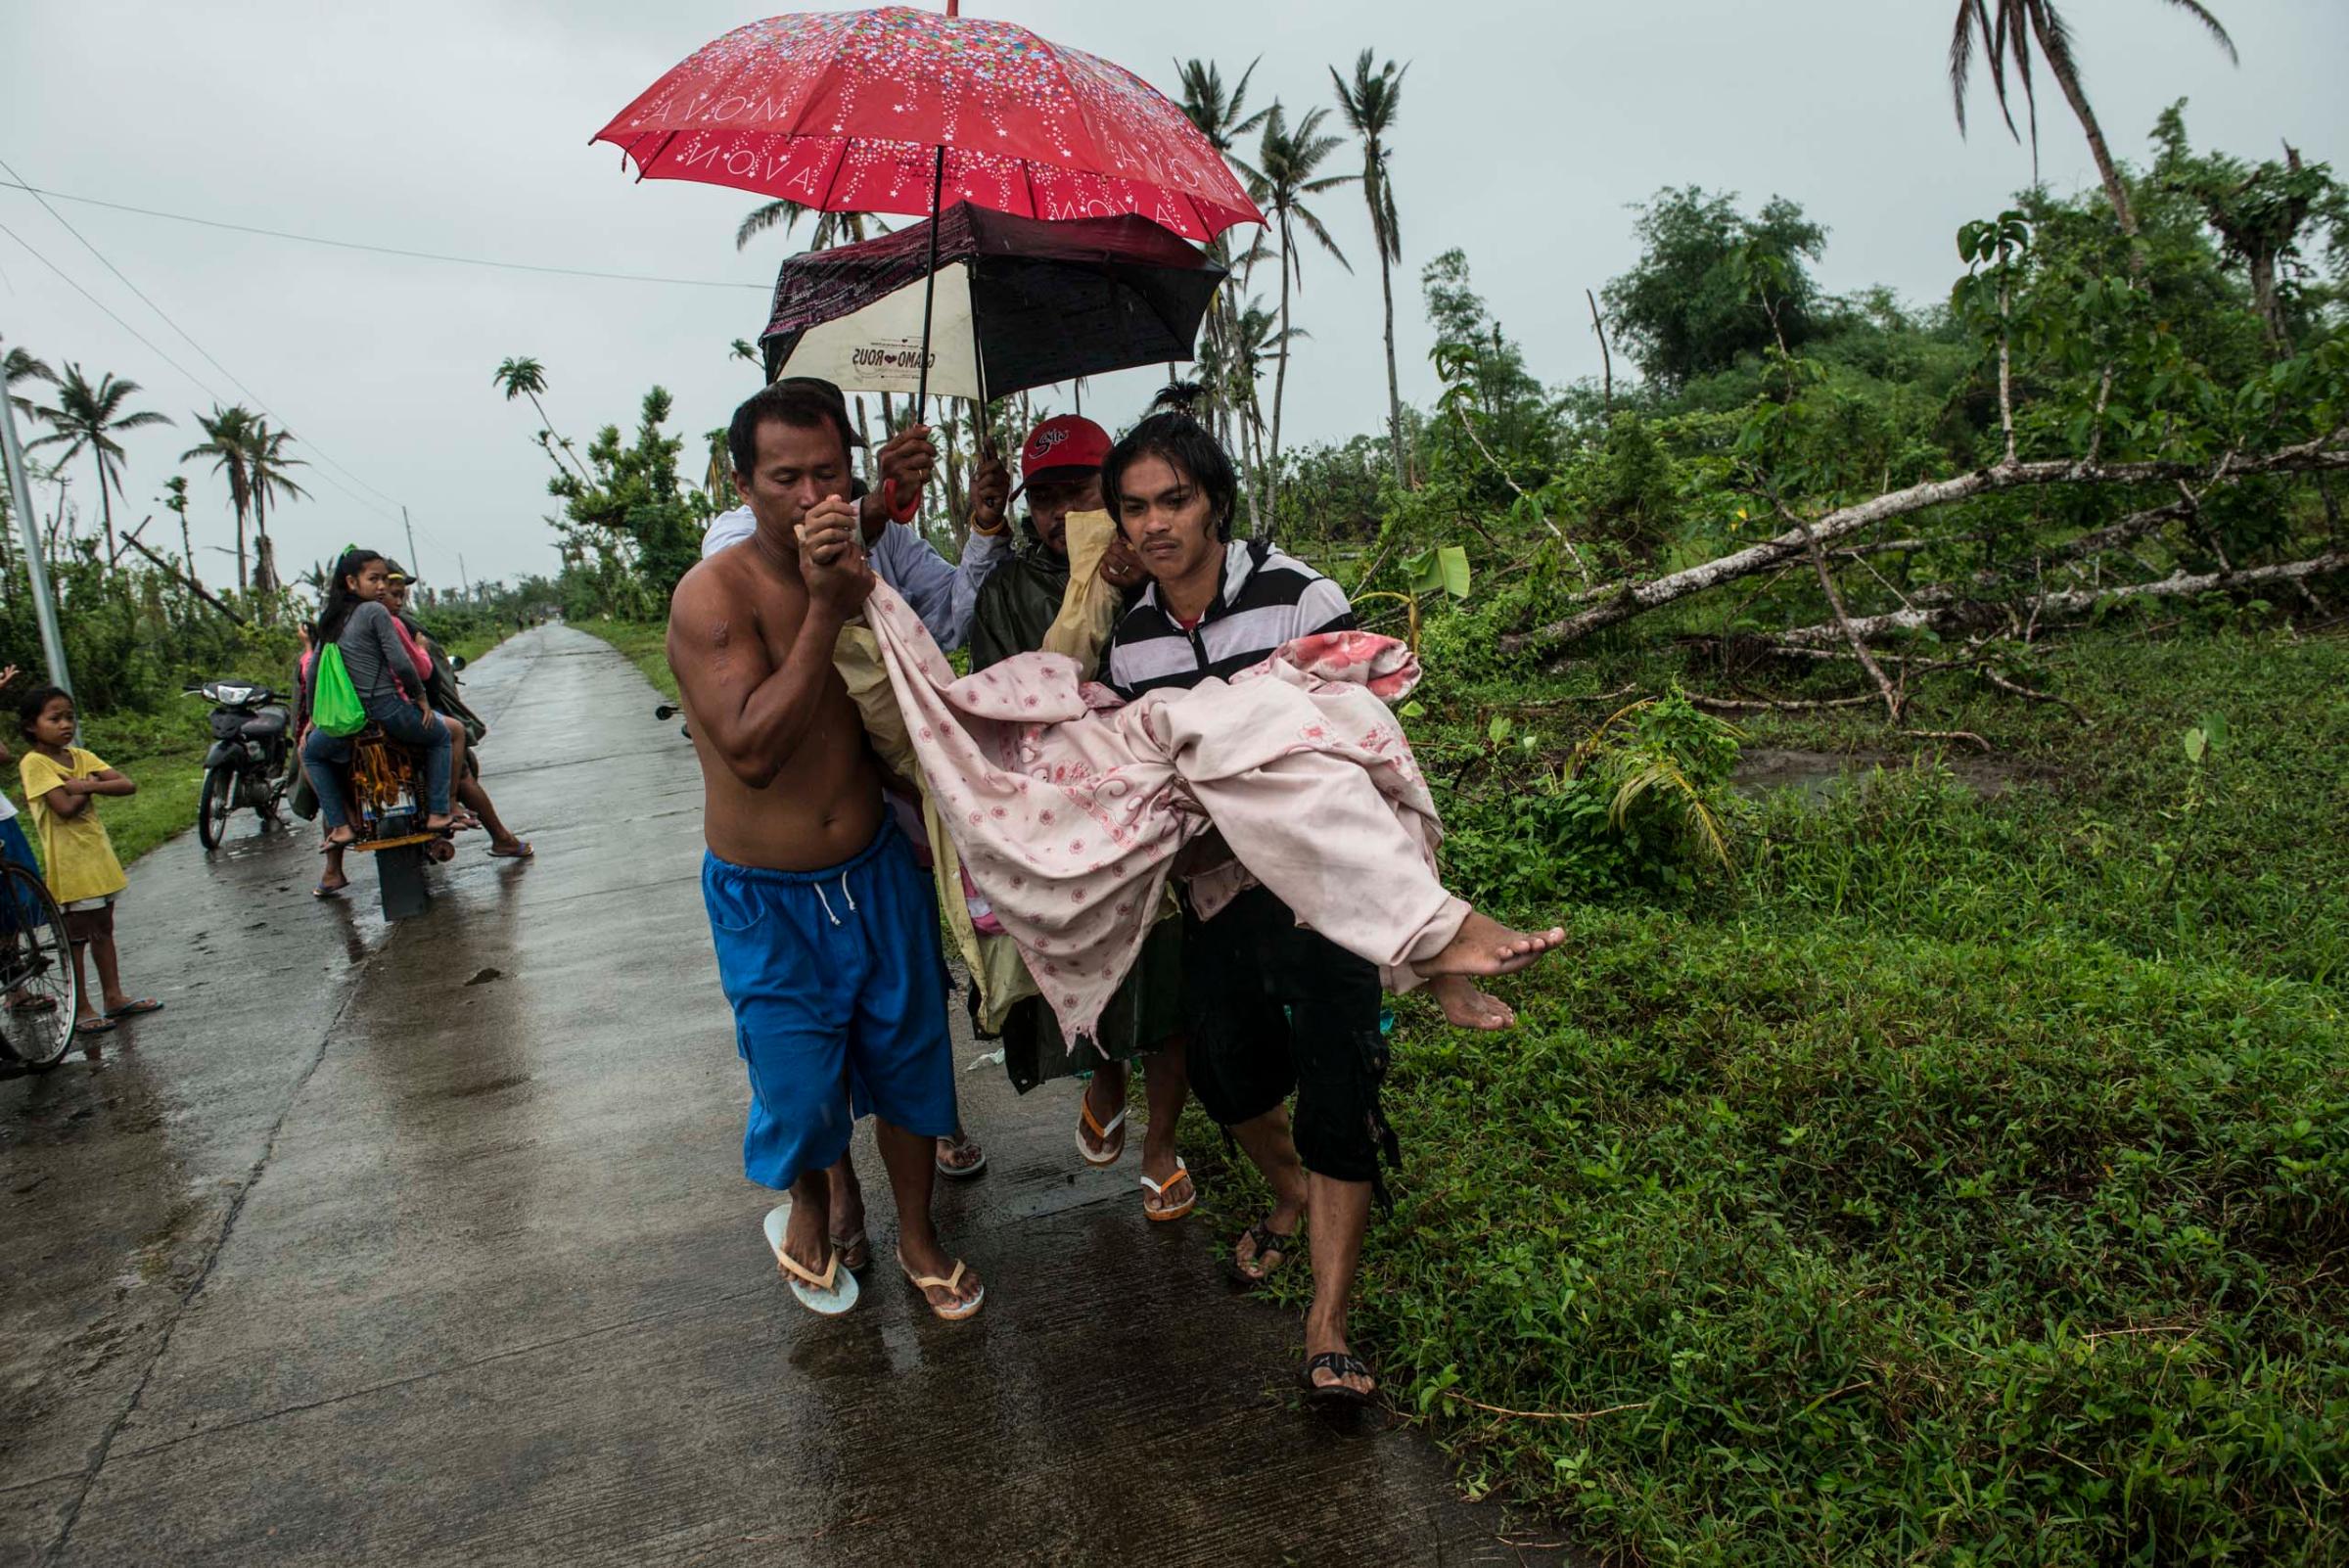 Jan.11, 2014: After the baby is born, Bacate and passersby help carry Analyn Pesado and the baby to a pickup truck on the road outside of Tacloban.